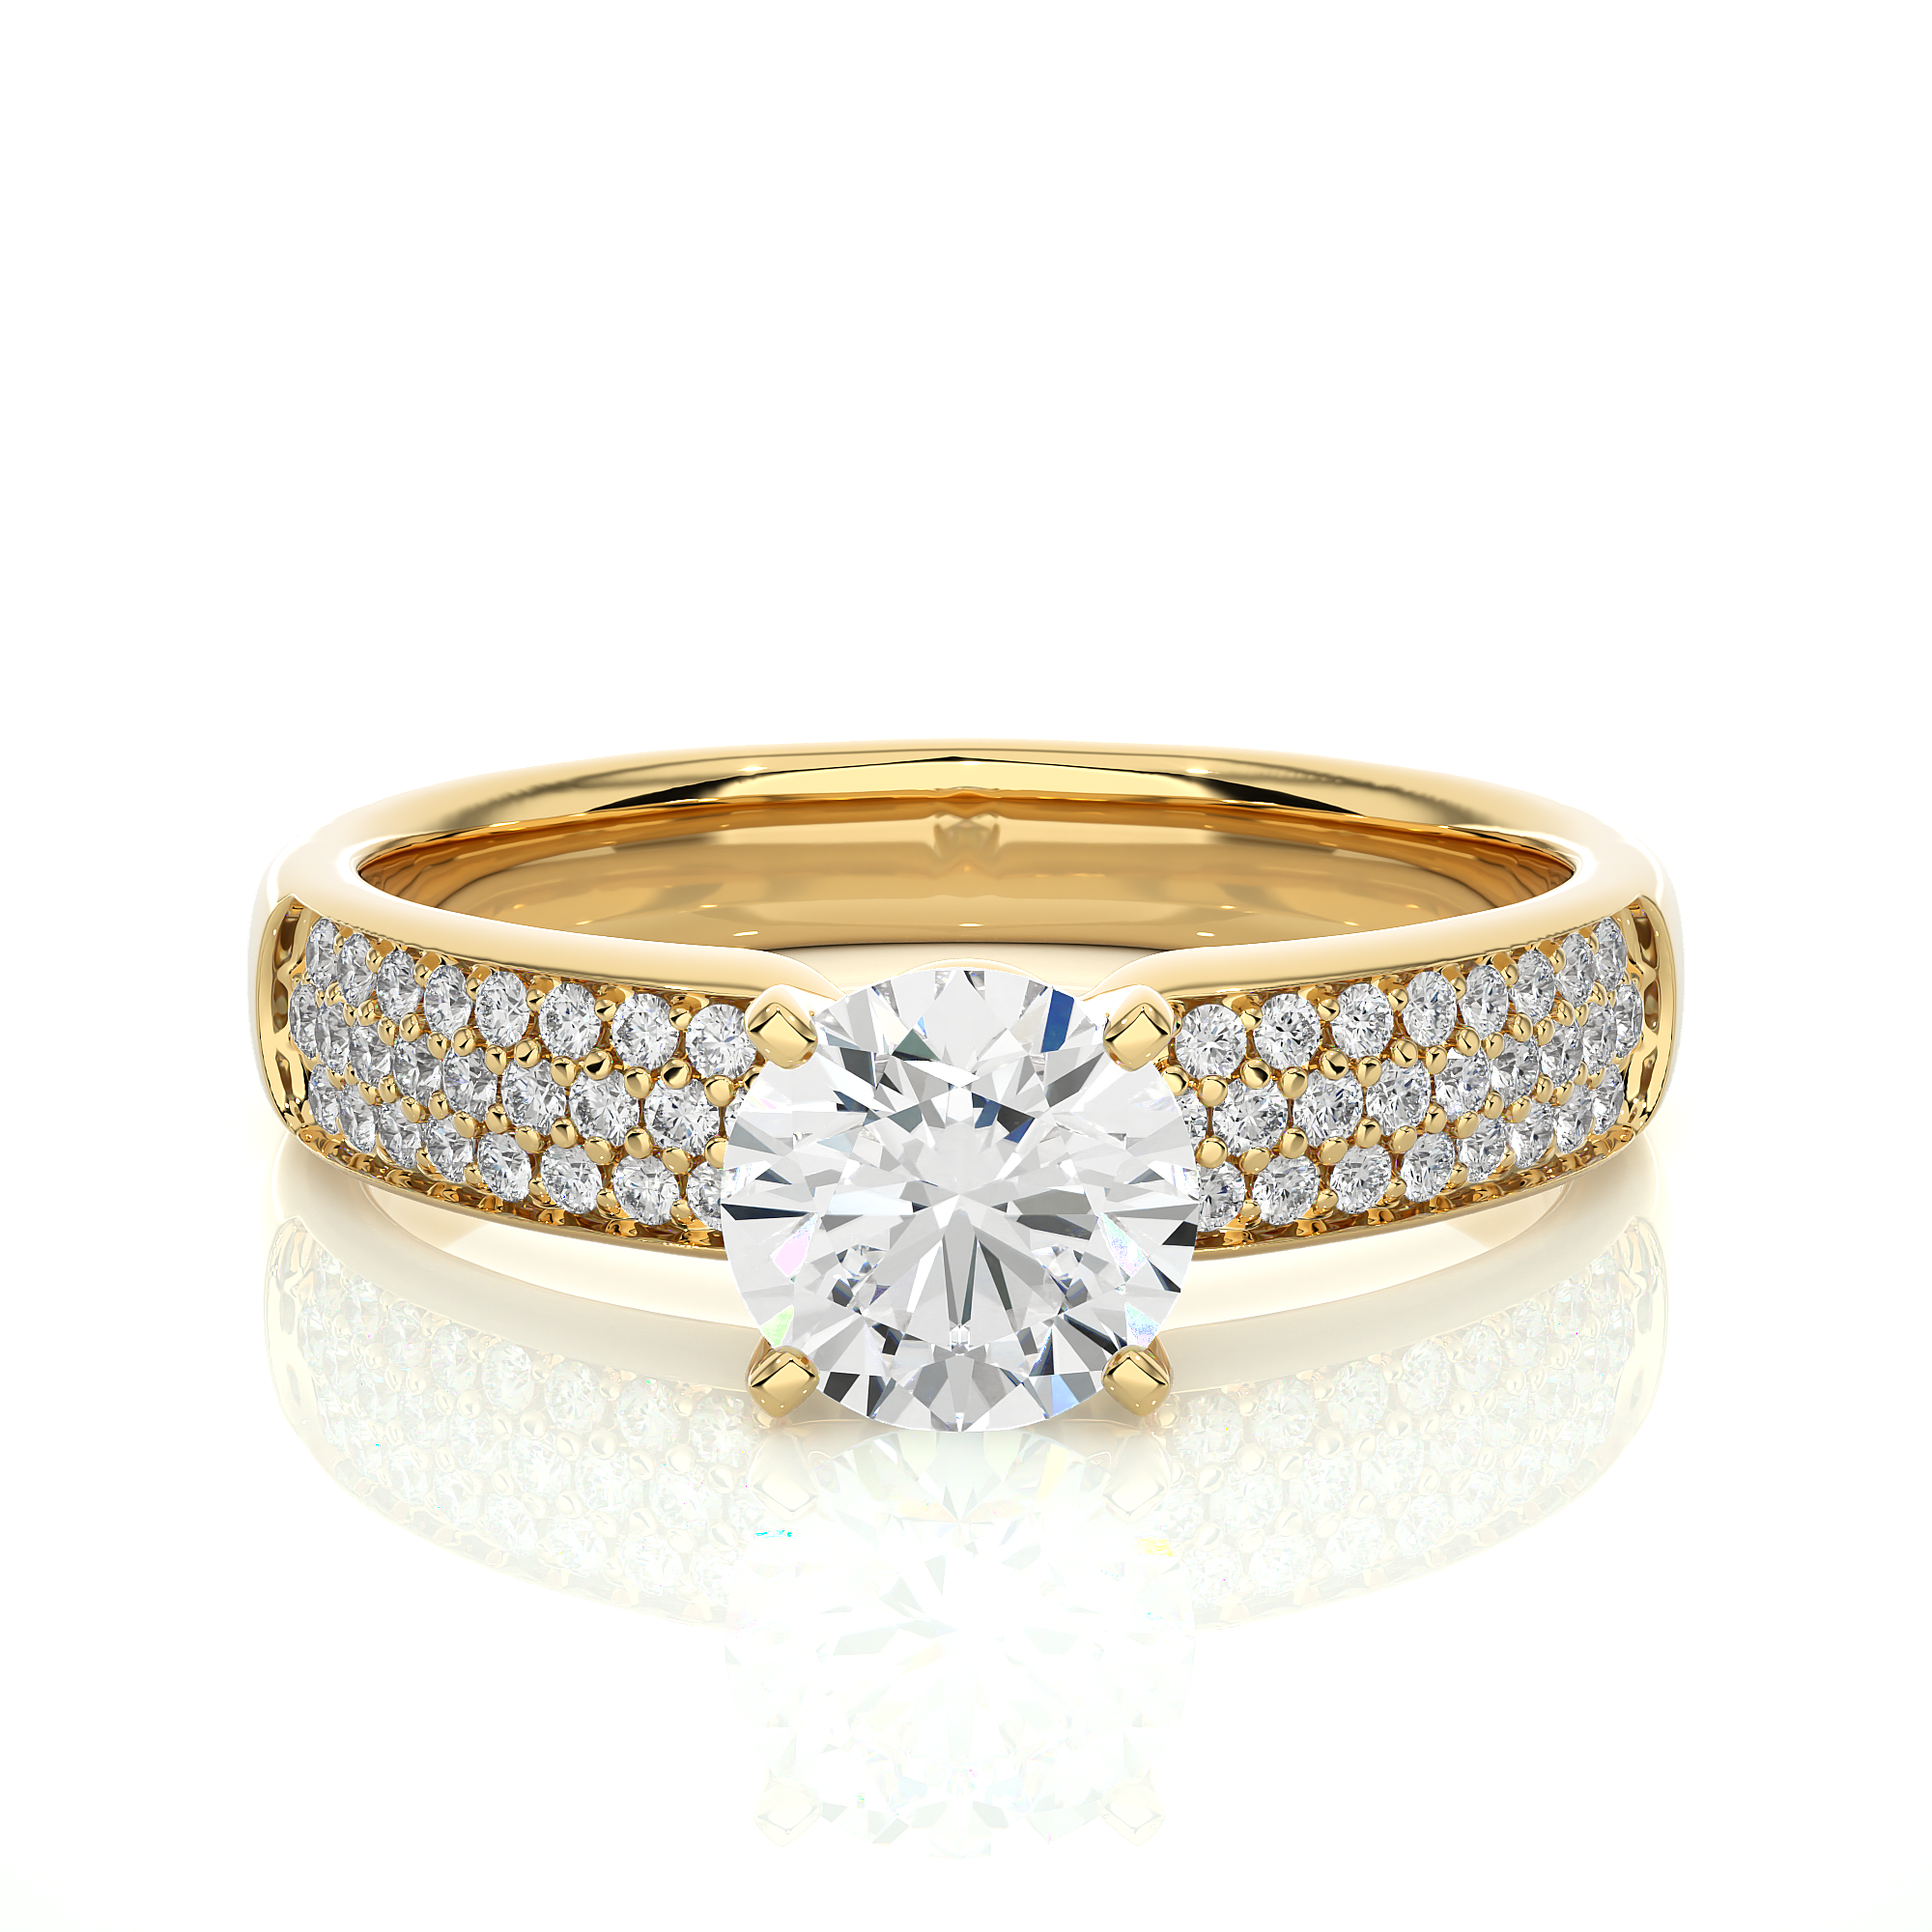 Catherine Ring - Solitaire Diamond Ring